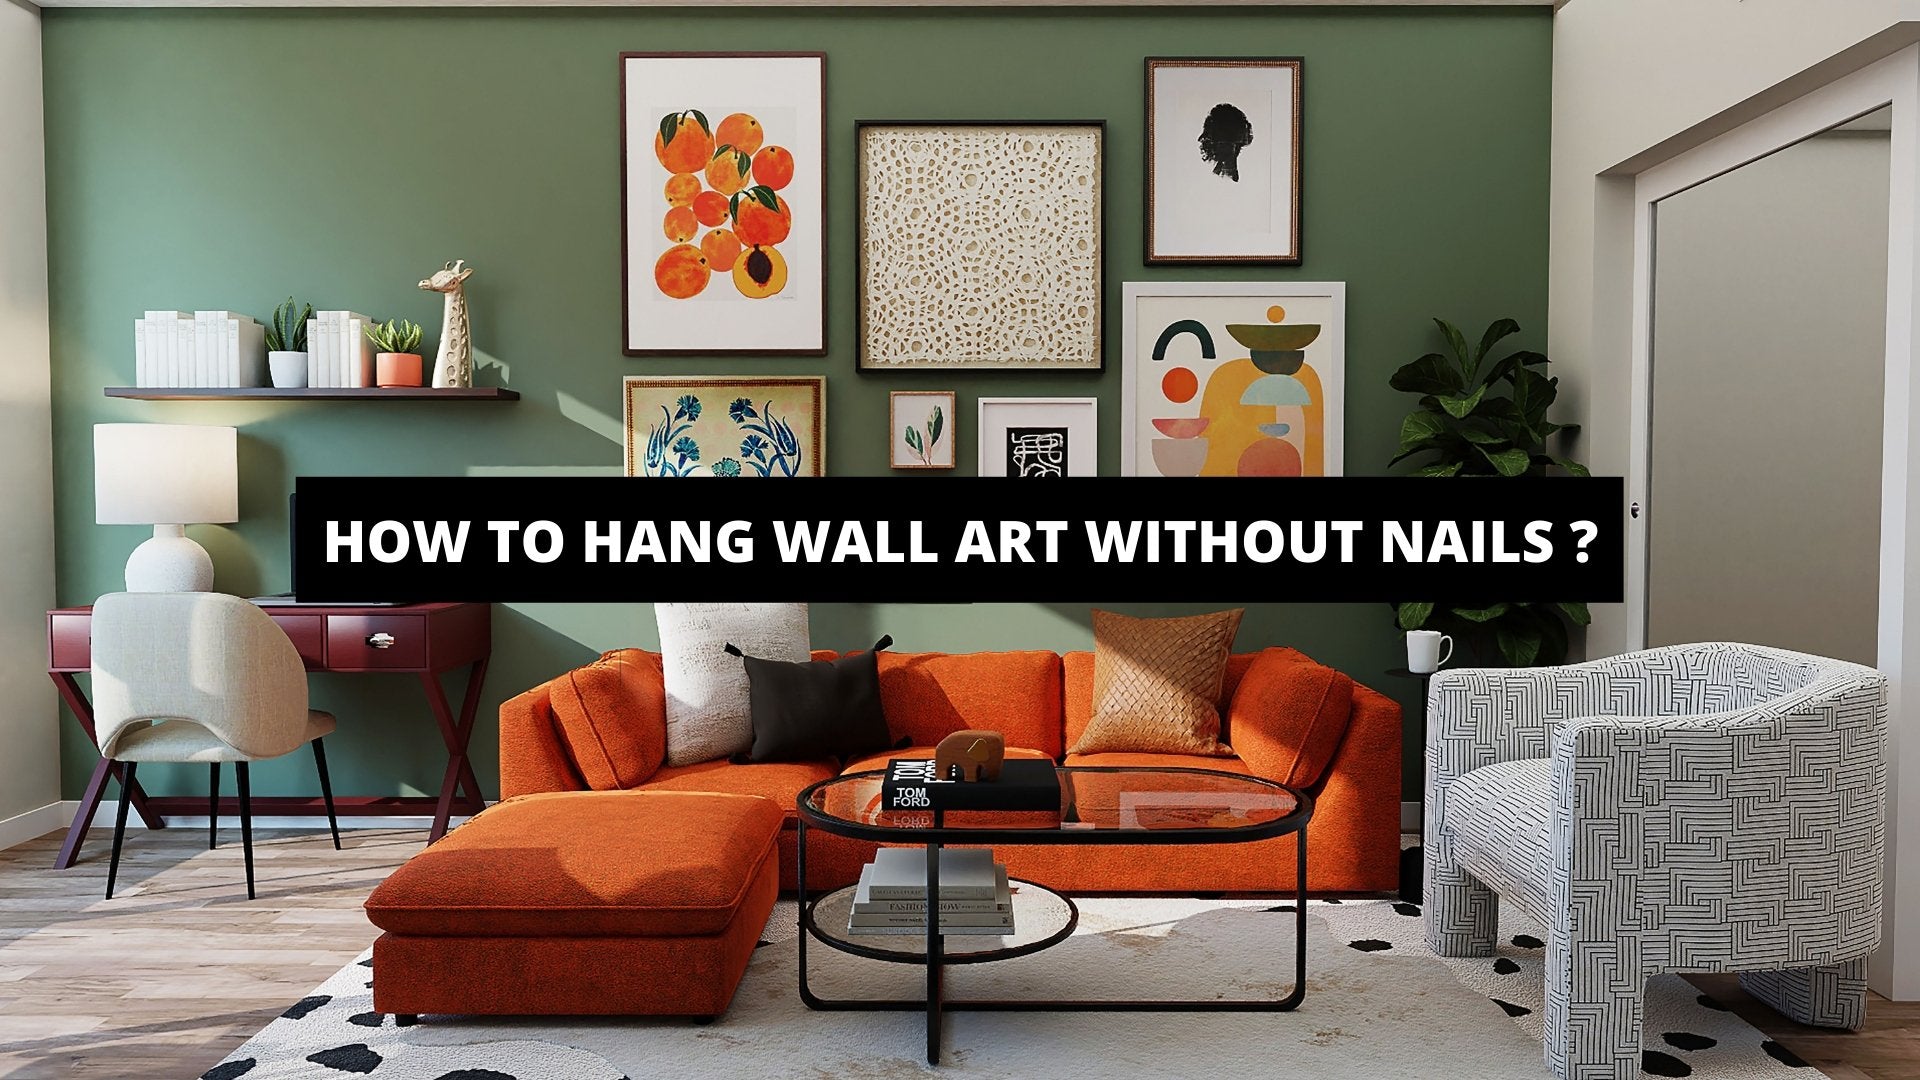 How to Hang Wall Art Without Nails ? - The Trendy Art